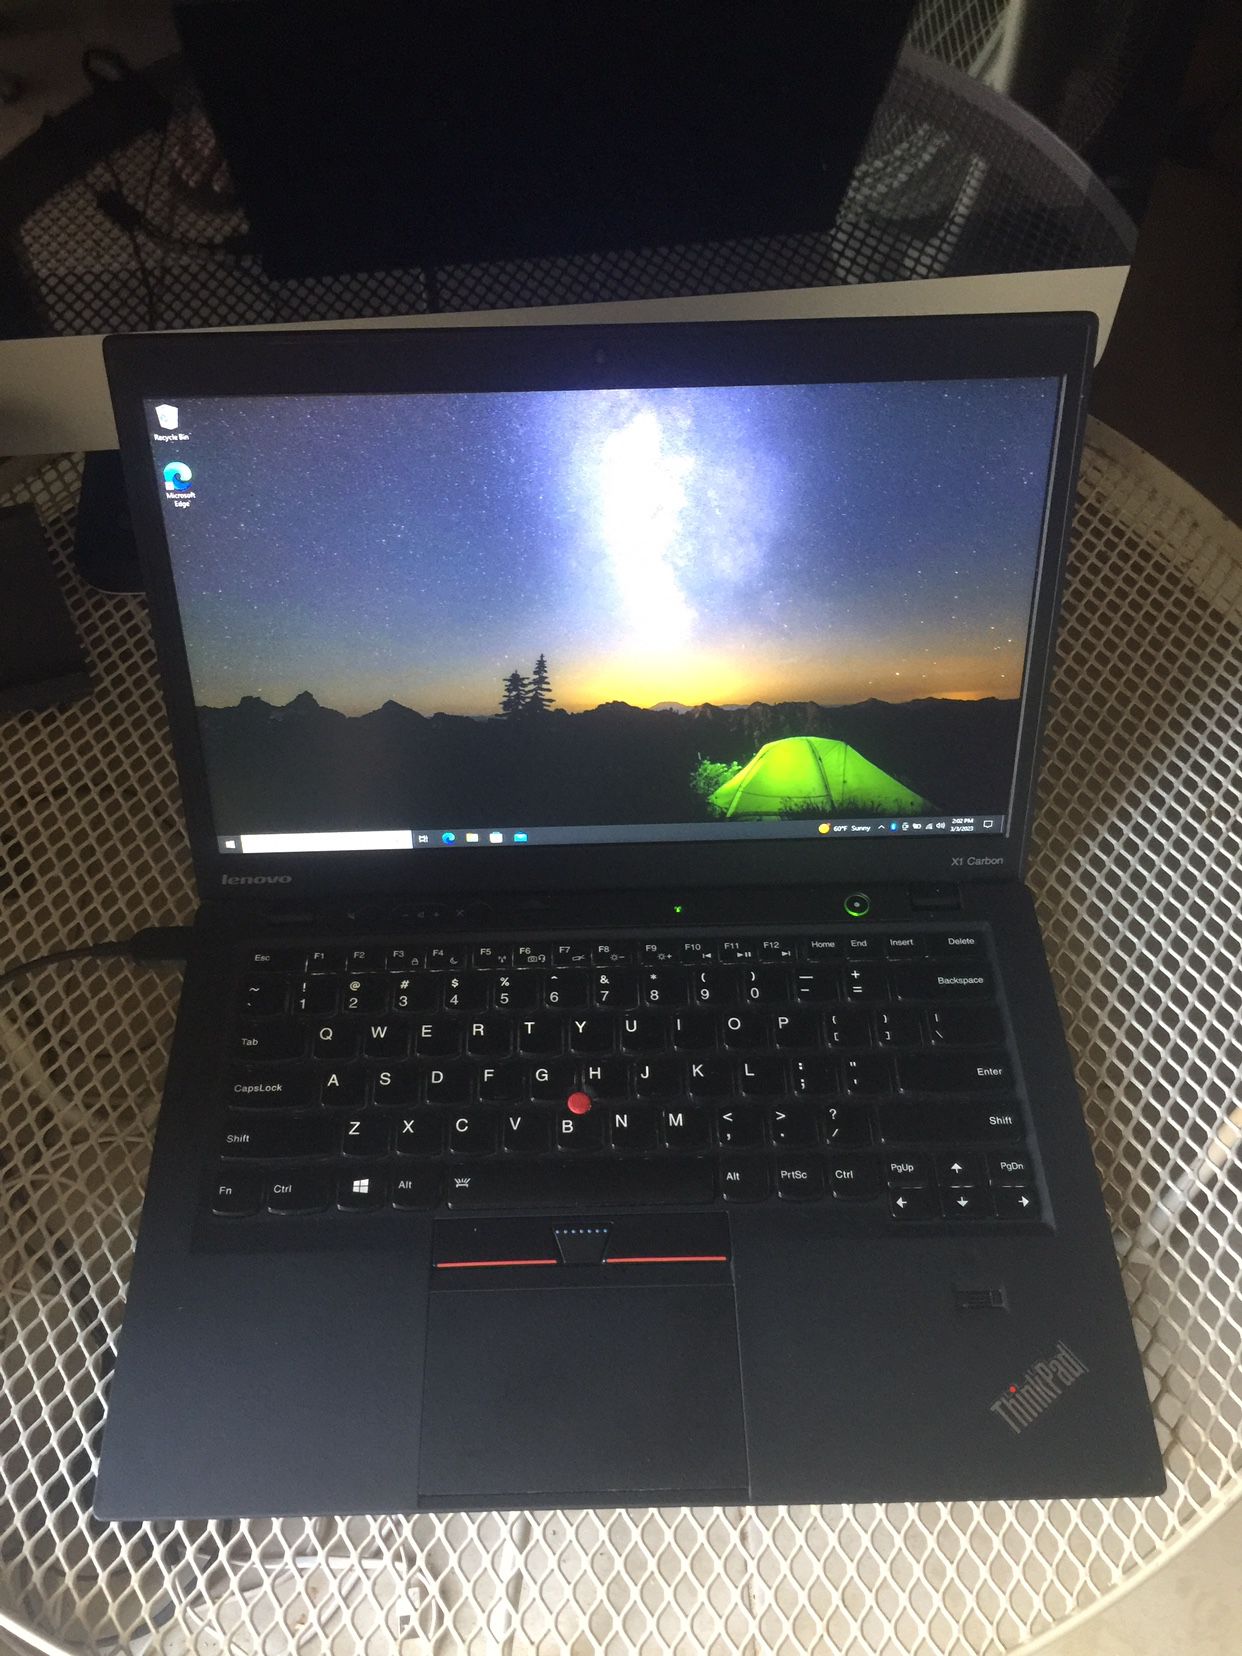 Slim Laptop Lenovo X1 Carbon i7 Processor 180gb Hardrive 8gb Ram Come With Charger Window 10 Light up Keyboard 